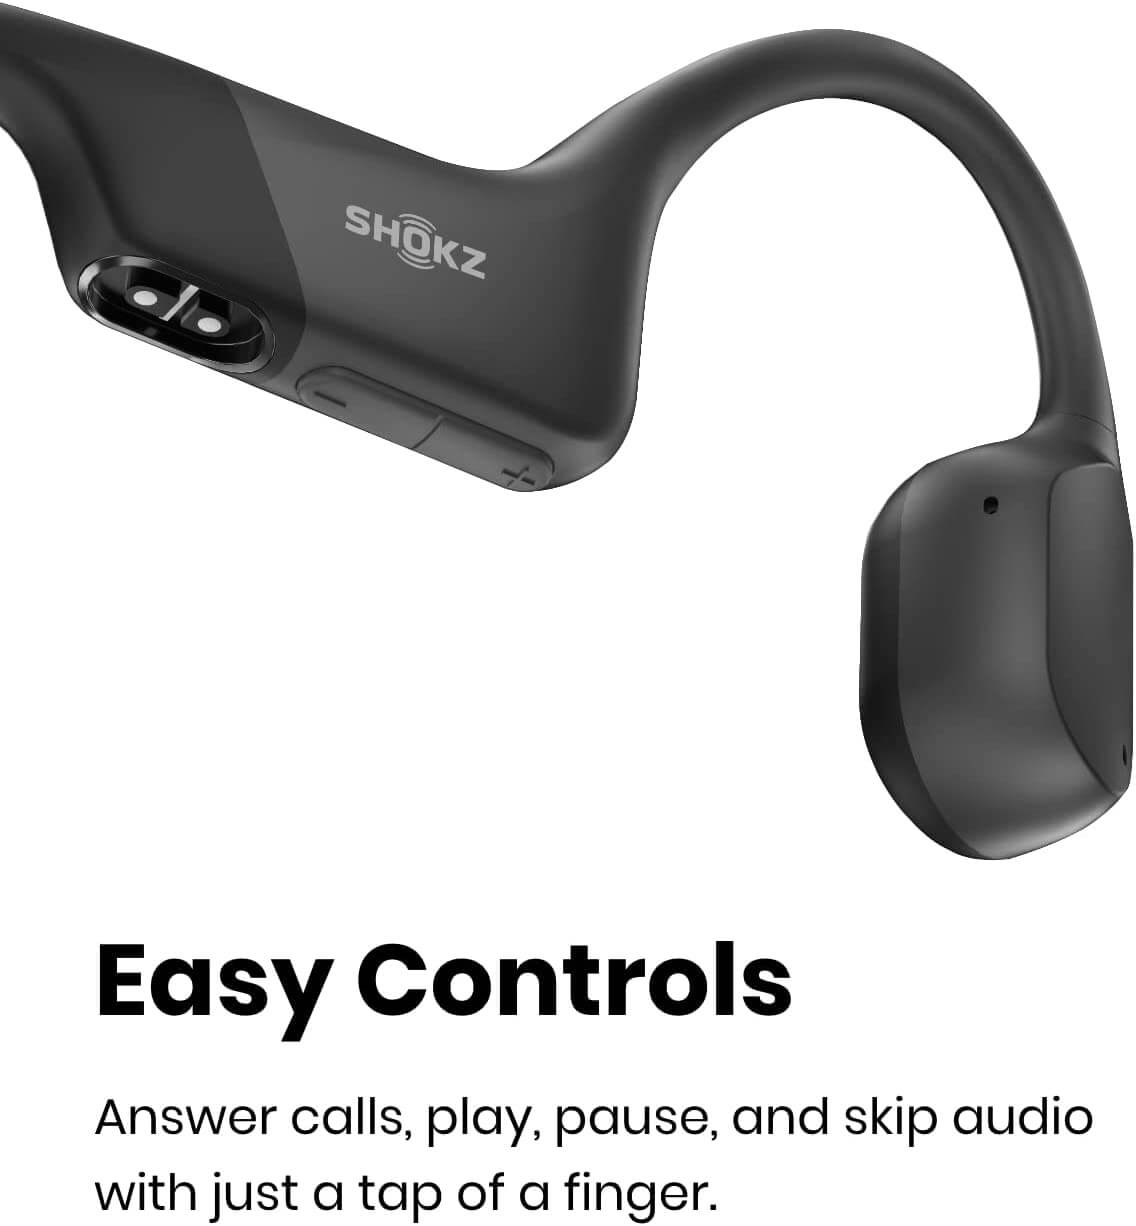 shokz openrun - showing control buttons and magnetic charging points